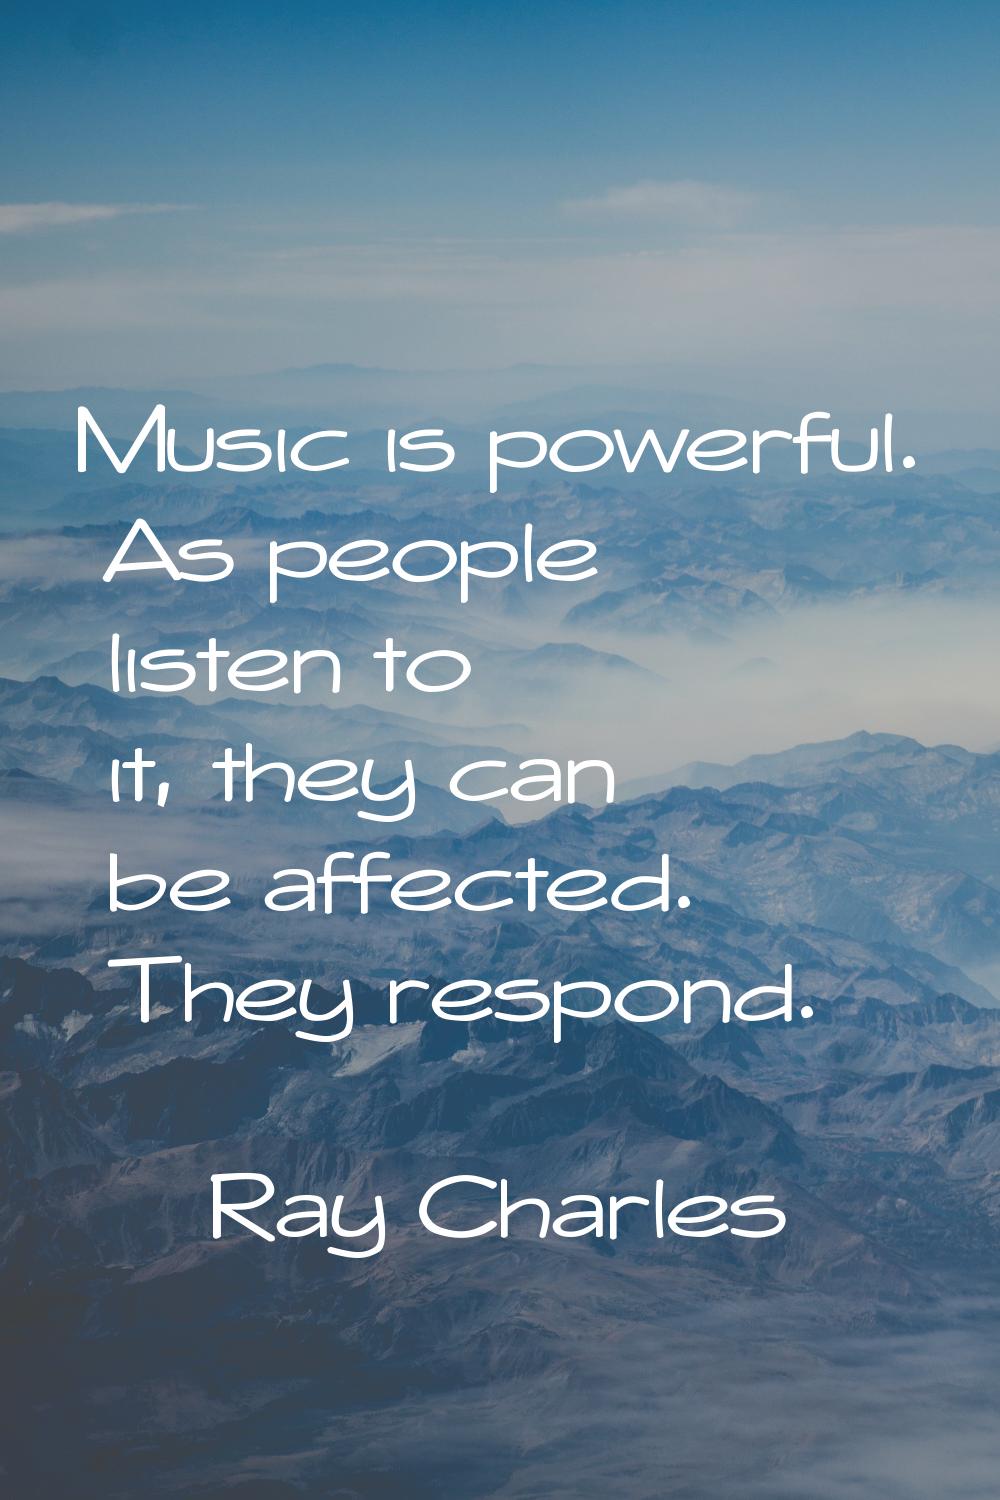 Music is powerful. As people listen to it, they can be affected. They respond.